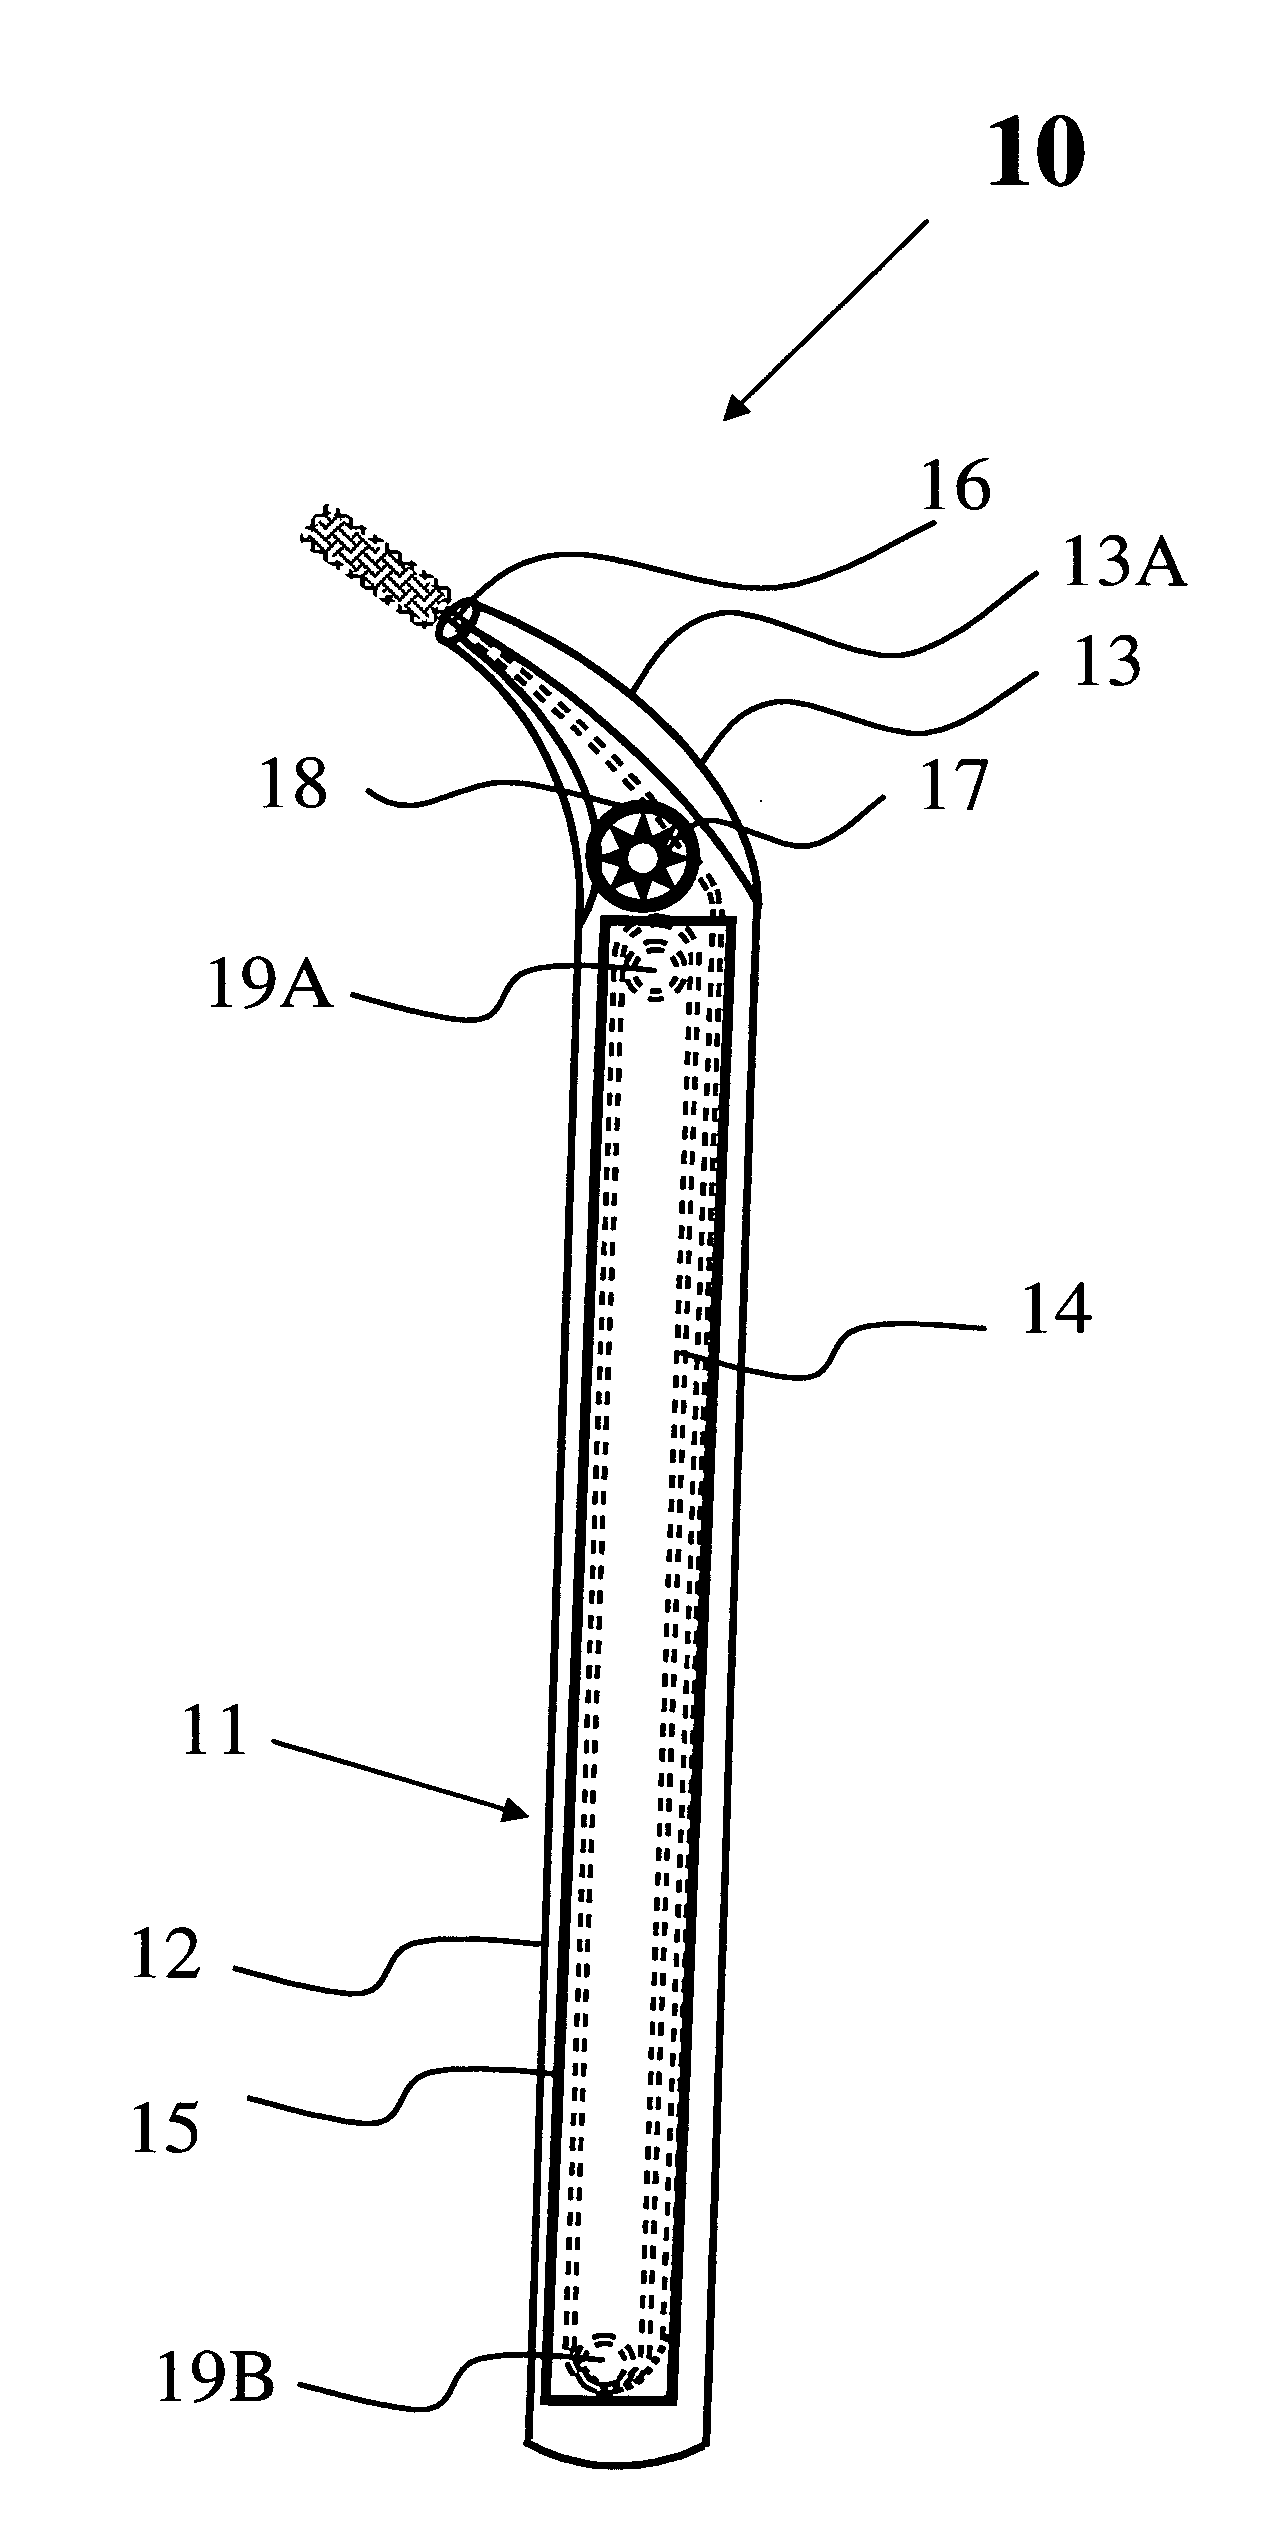 Continuous feed inter-dental brush and device